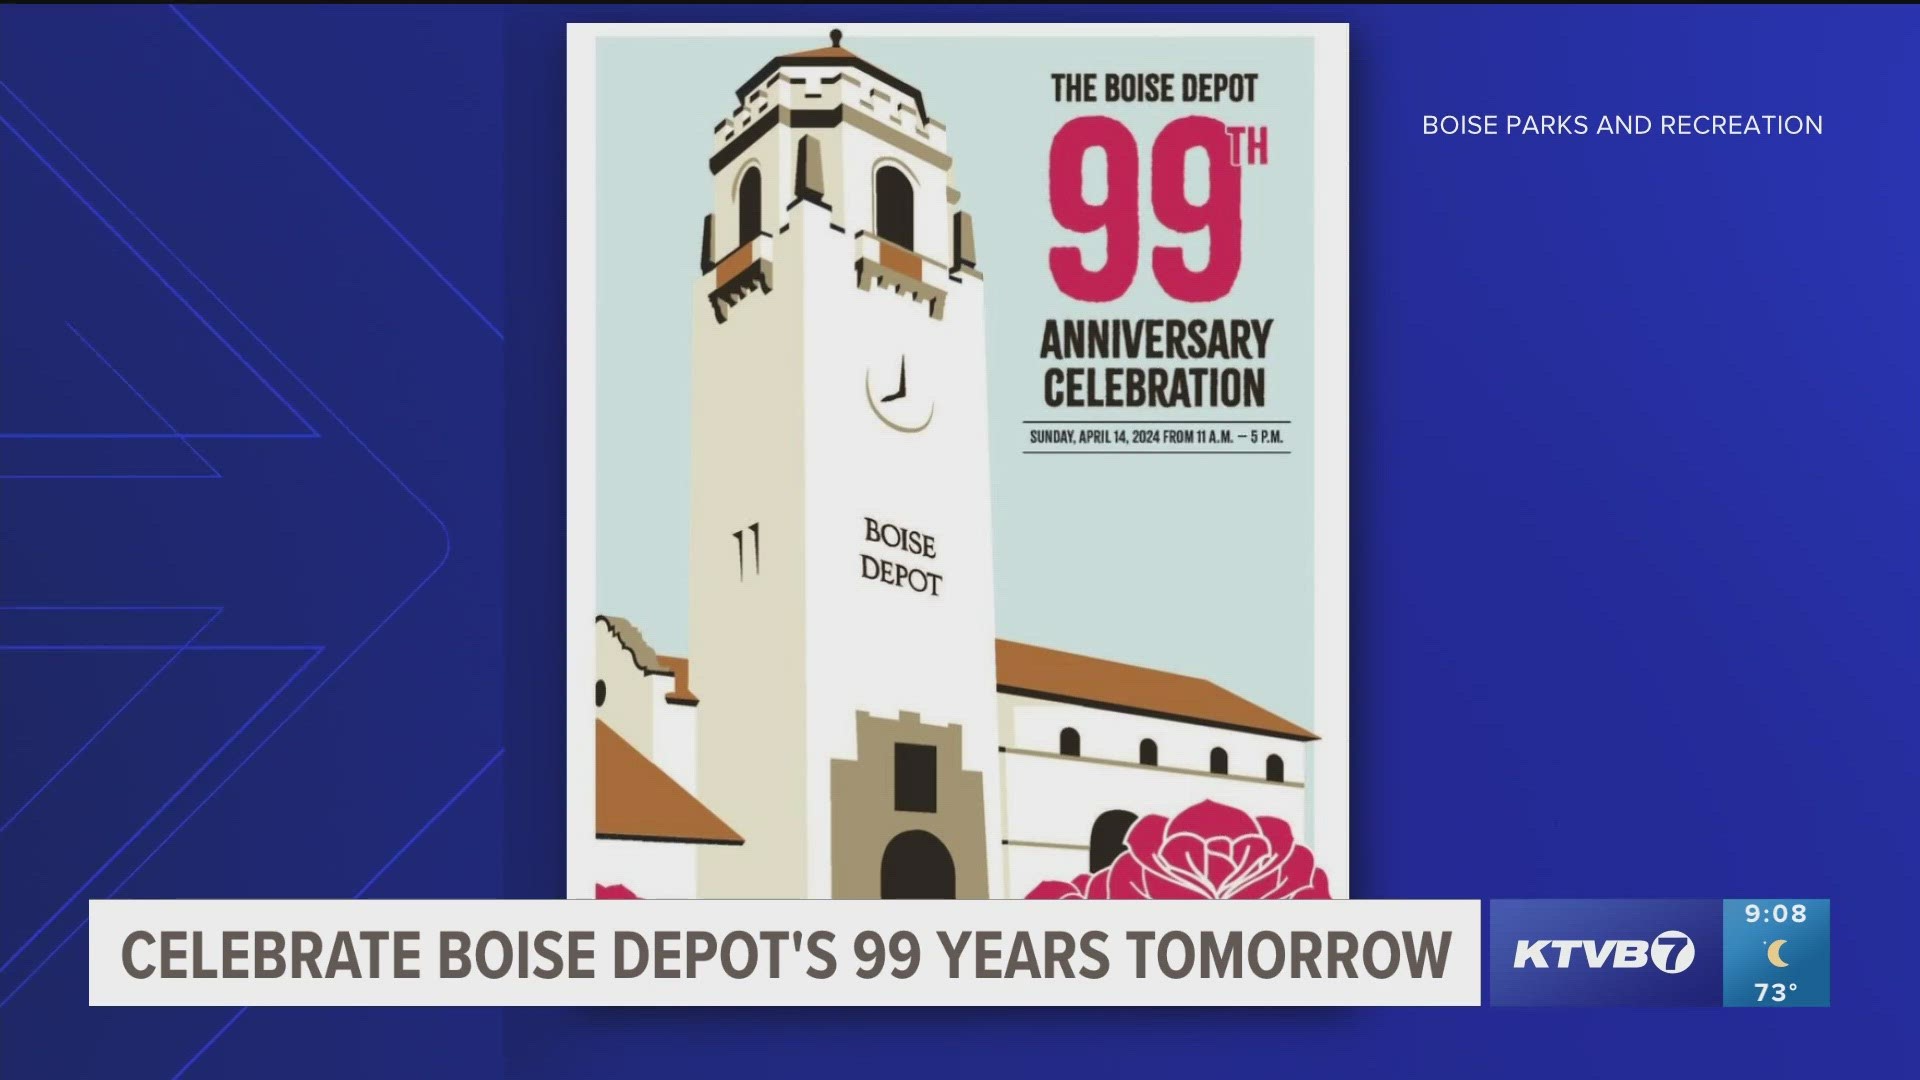 The historic landmark is 99. Boise Parks and Rec is having a celebration on Sunday, admission is free.